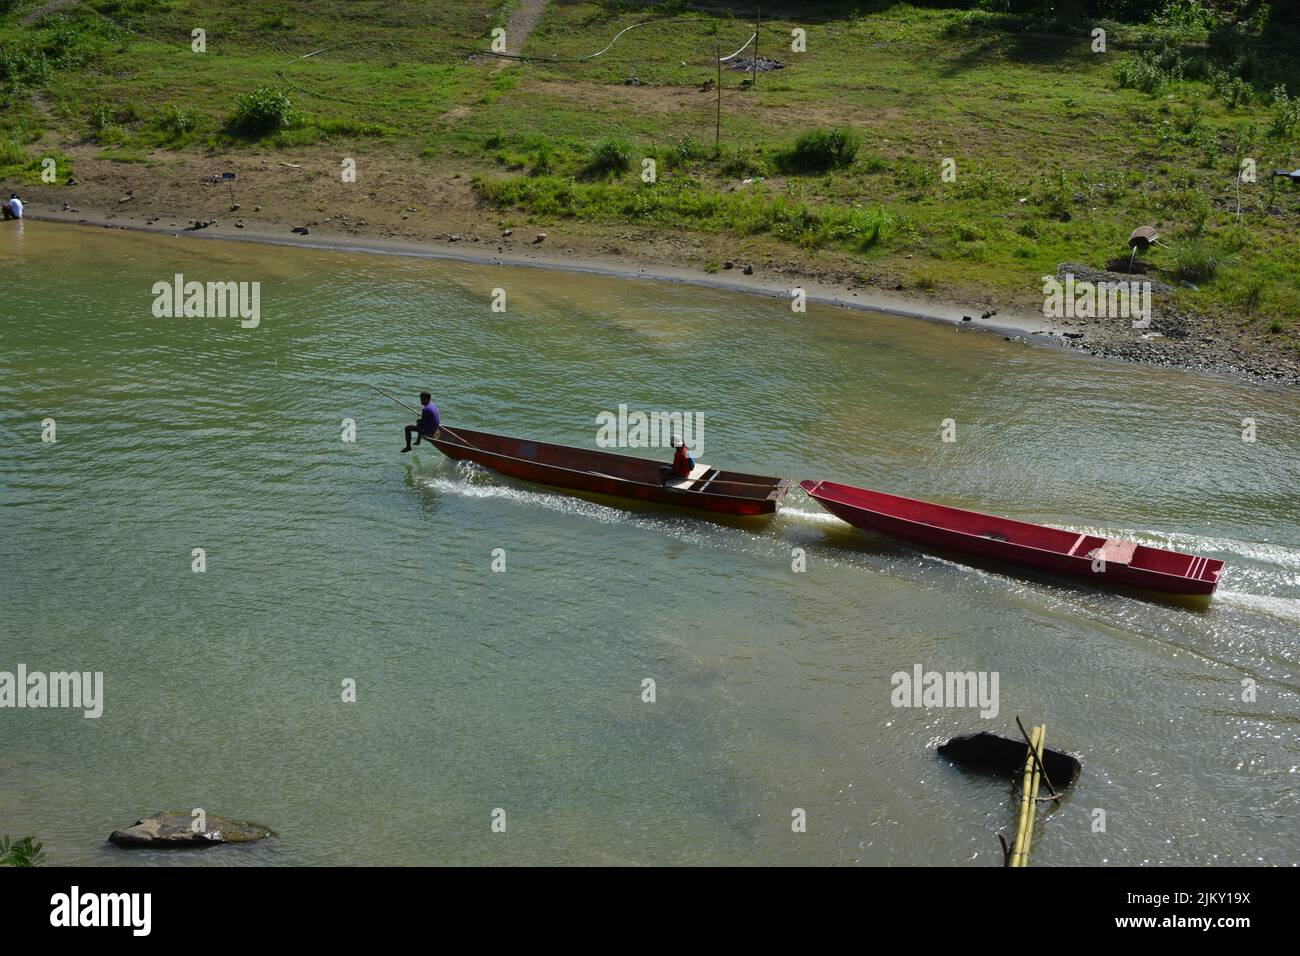 A couple red boats in the Wawa River, Rizal, Philippines Stock Photo